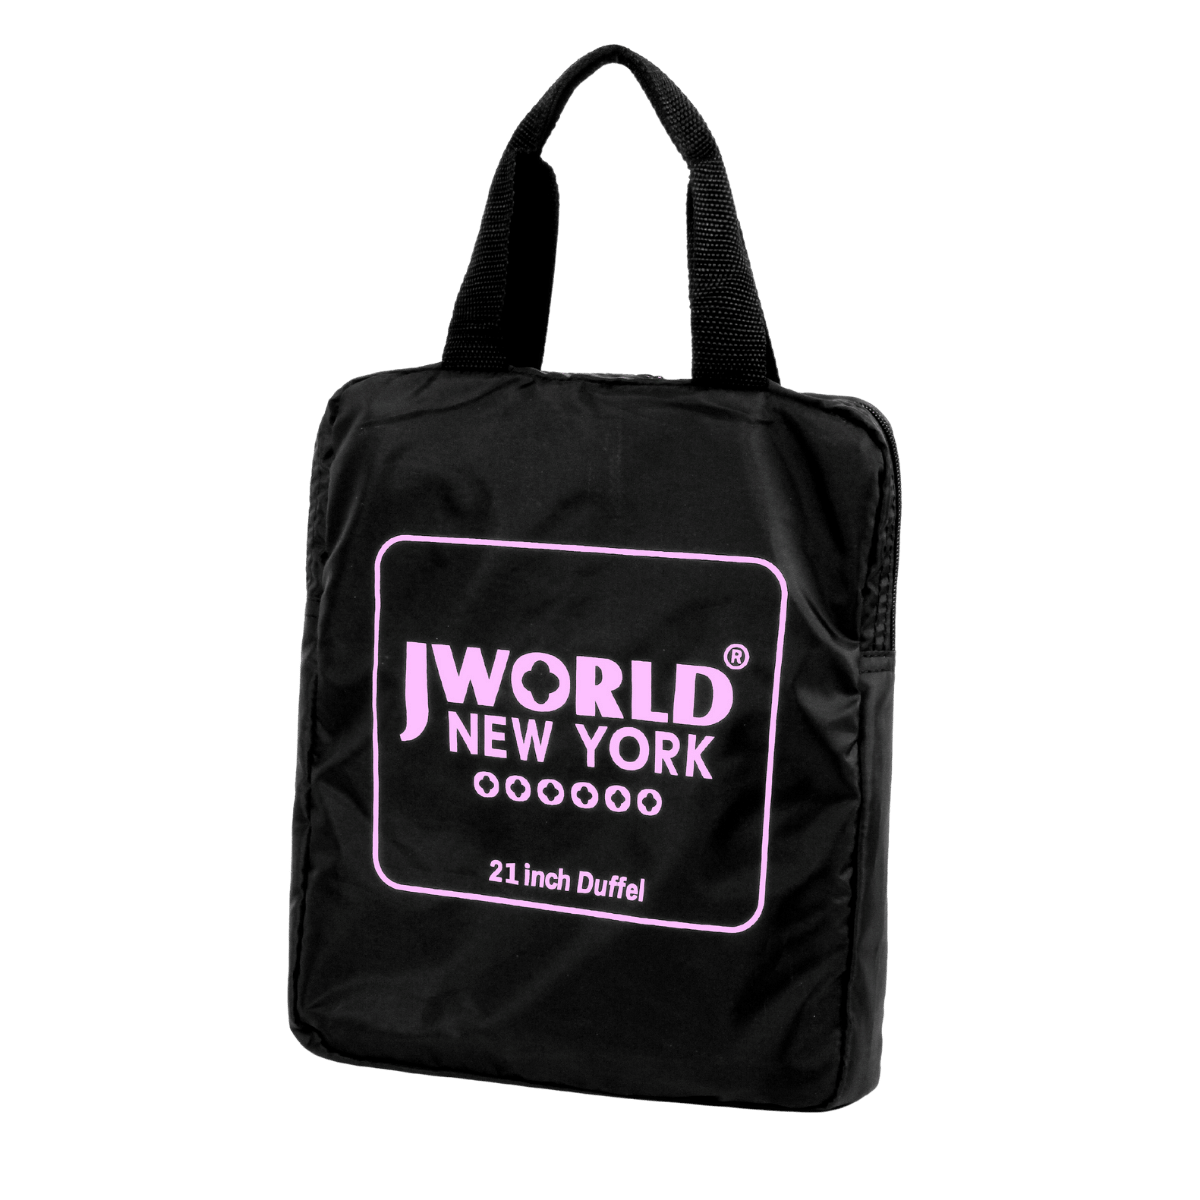 Duffle Bag 17 Duffel Travel Size Sports Gym Bags Workout Blank Carry-on  Luggage